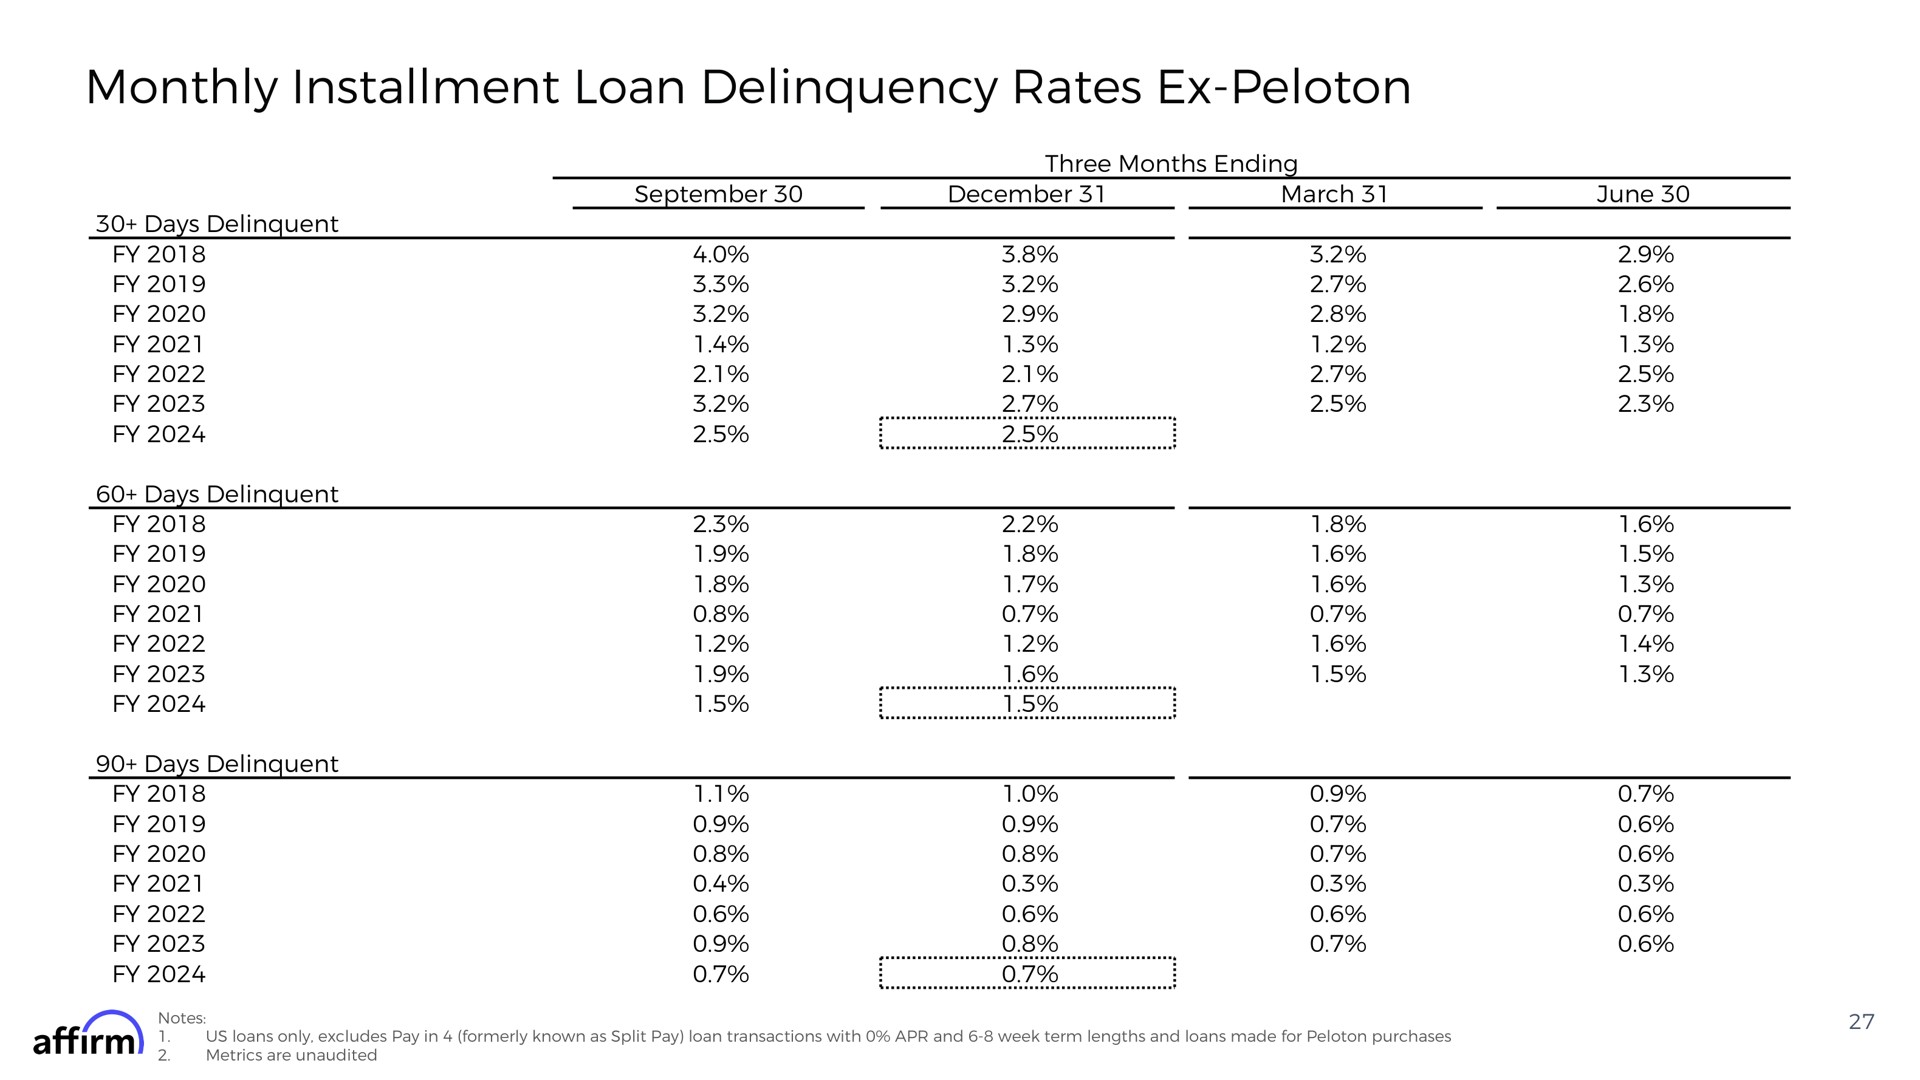 monthly installment loan delinquency rates peloton mand | Affirm